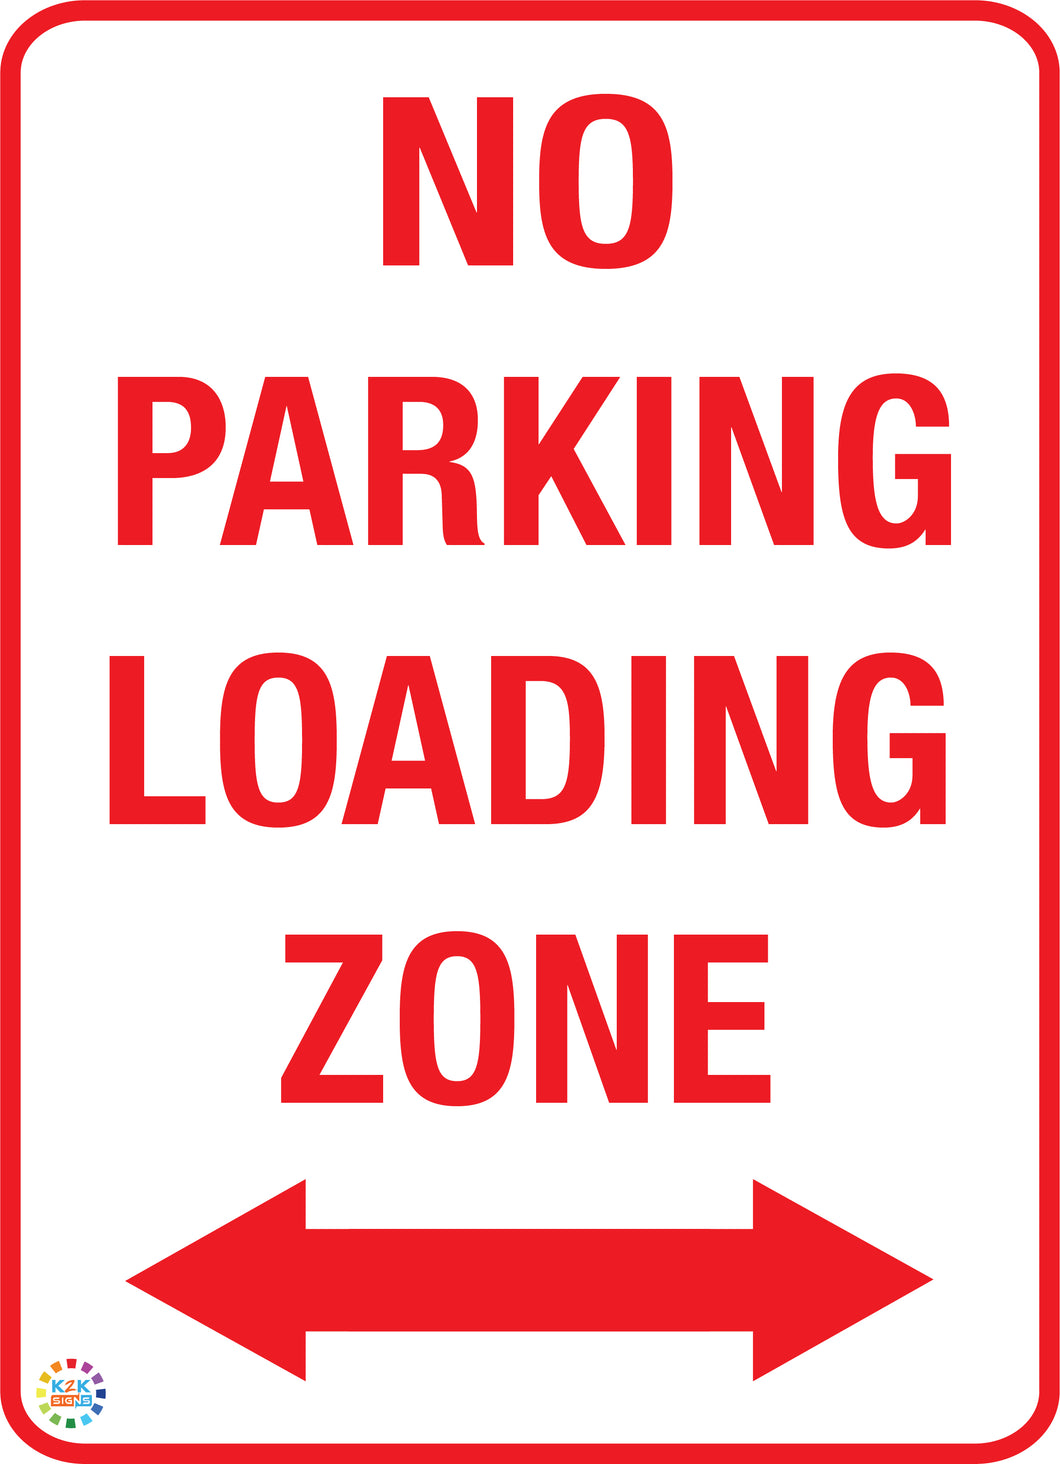 No Parking Loading Zone (Two Way Arrow Sign)